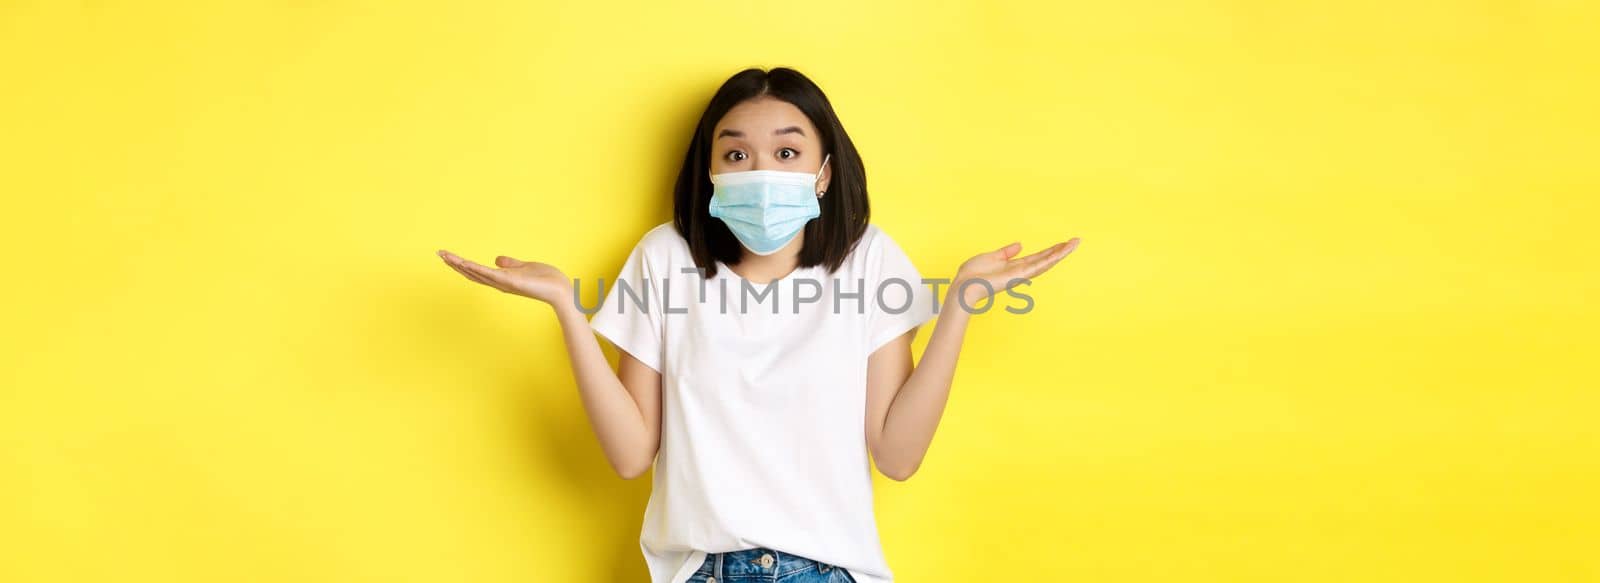 Covid-19, quarantine and social distancing concept. Clueless asian woman in medical mask shrugging shoulders, spread hands sideways clueless, know nothing, yellow background.